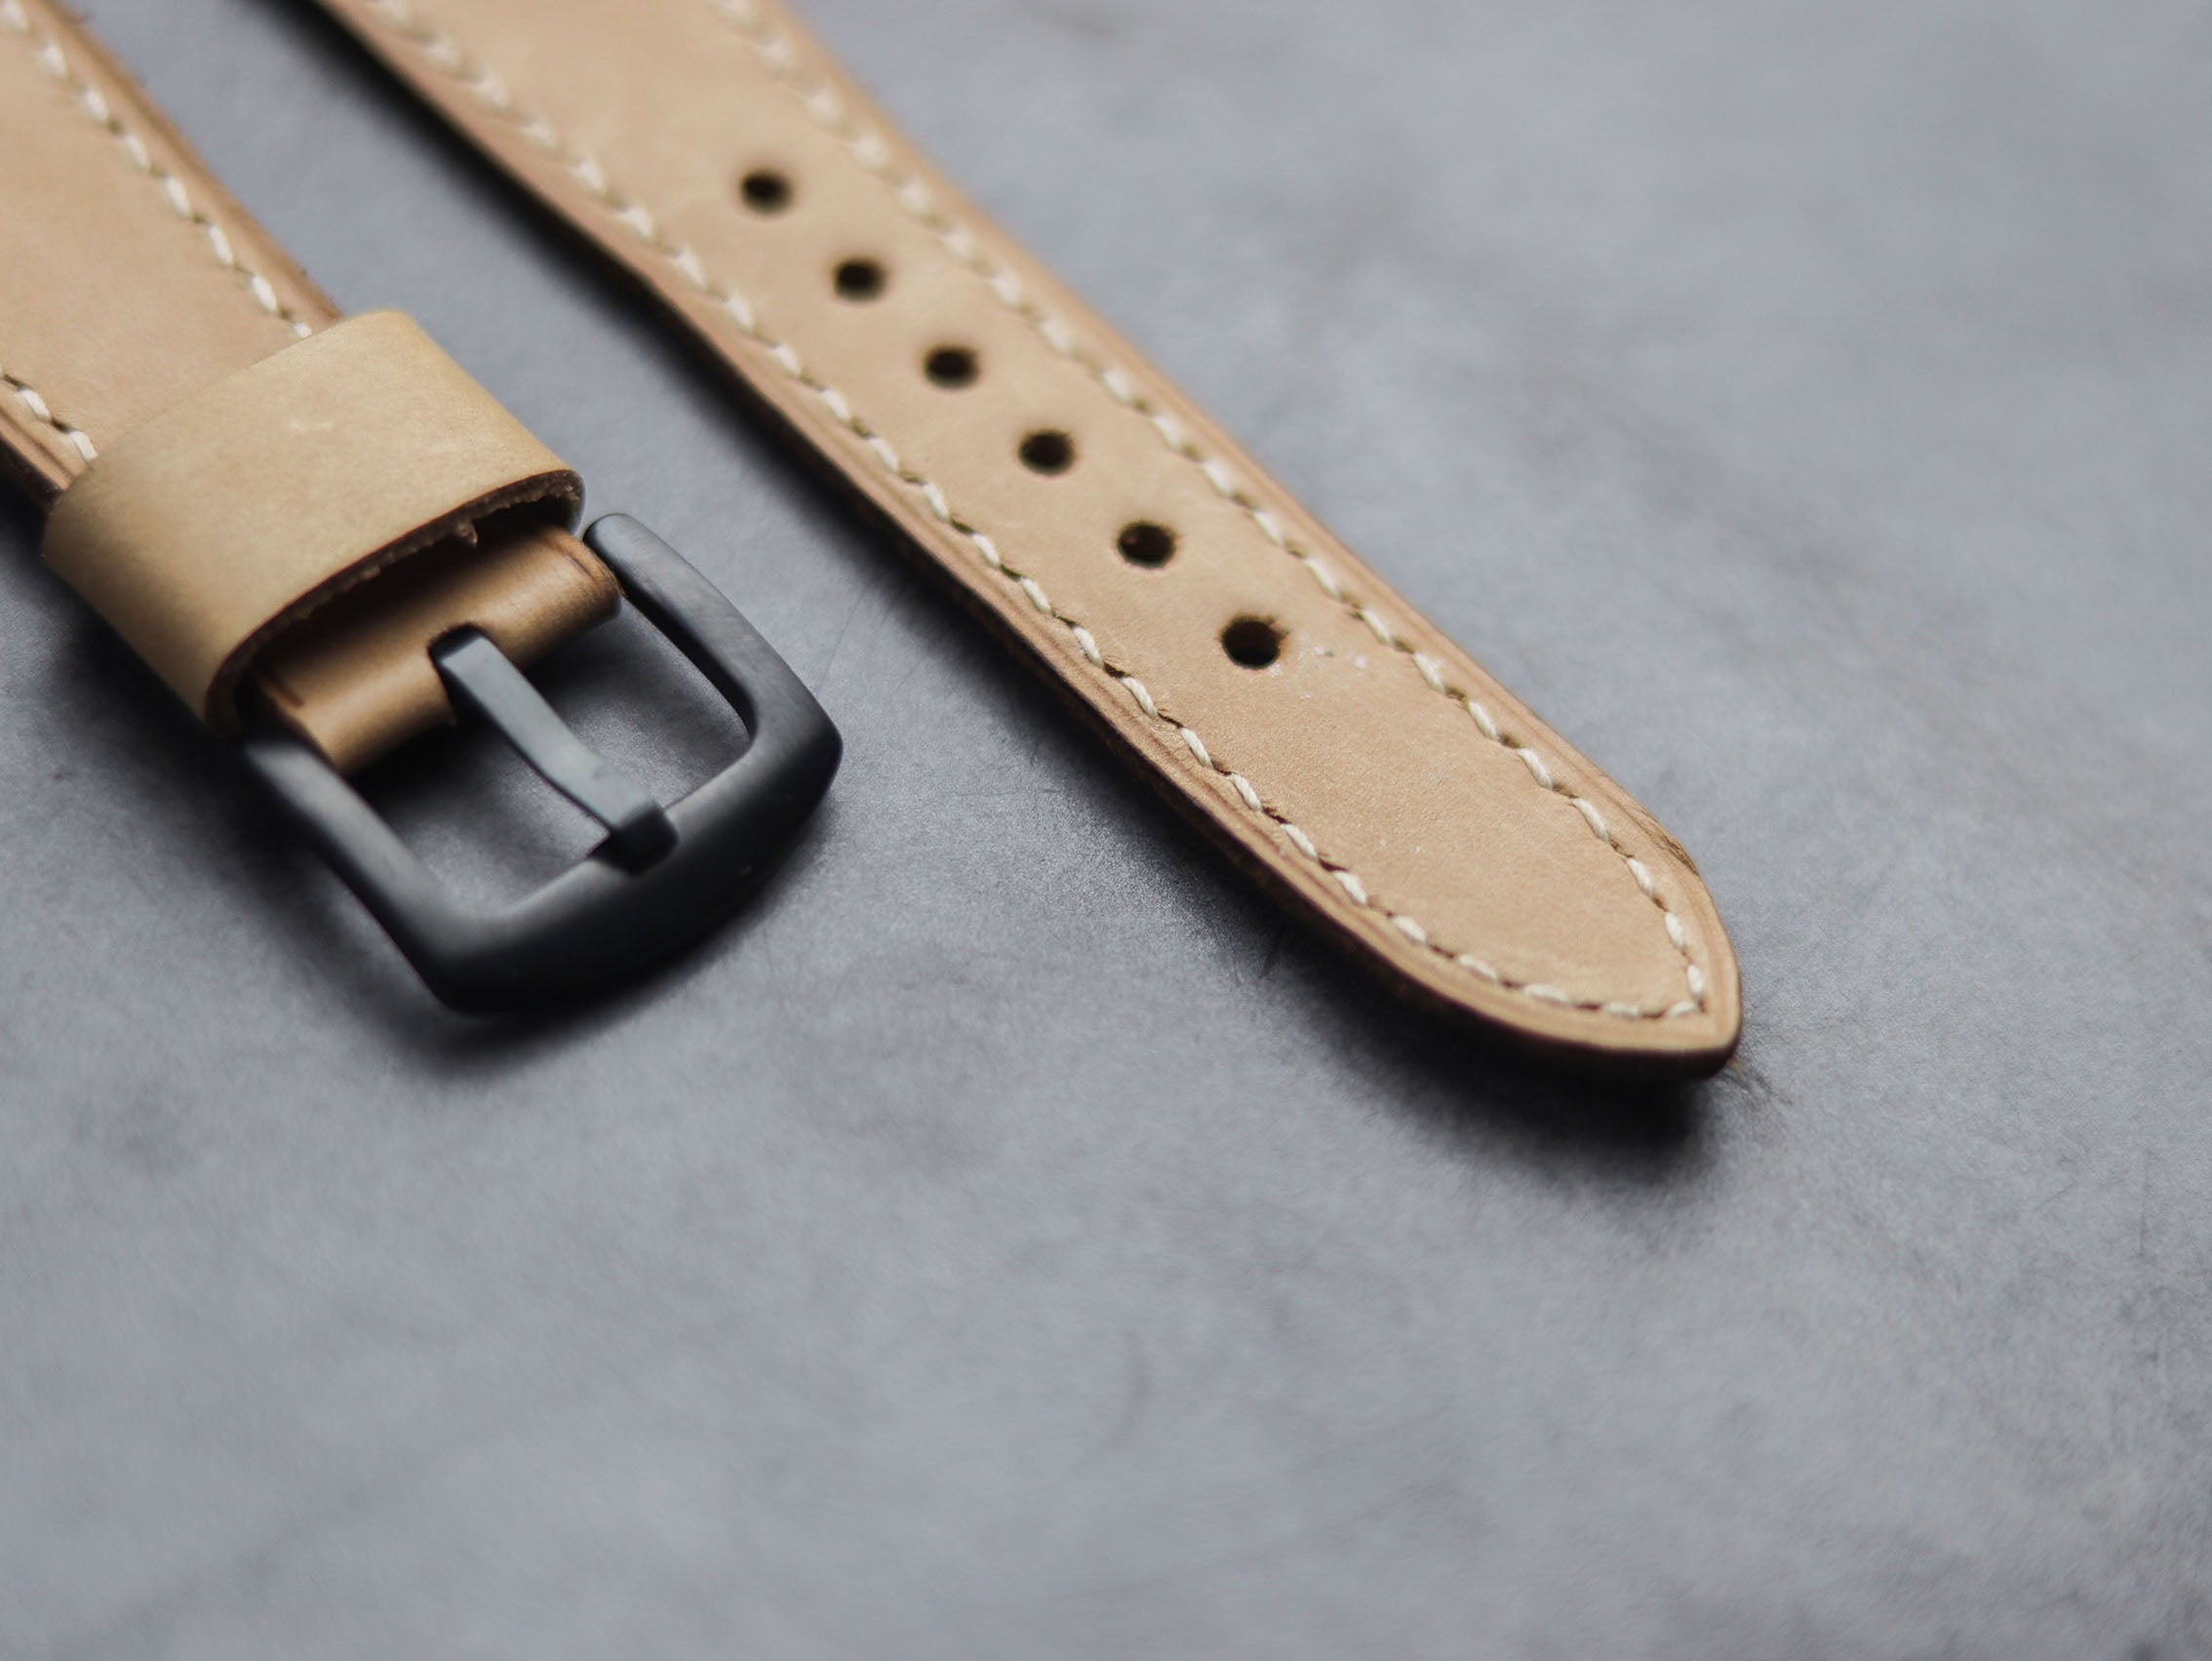 NATURAL BUTTERO FULL STITCHED HAND-CRAFTED APPLE WATCH STRAPS